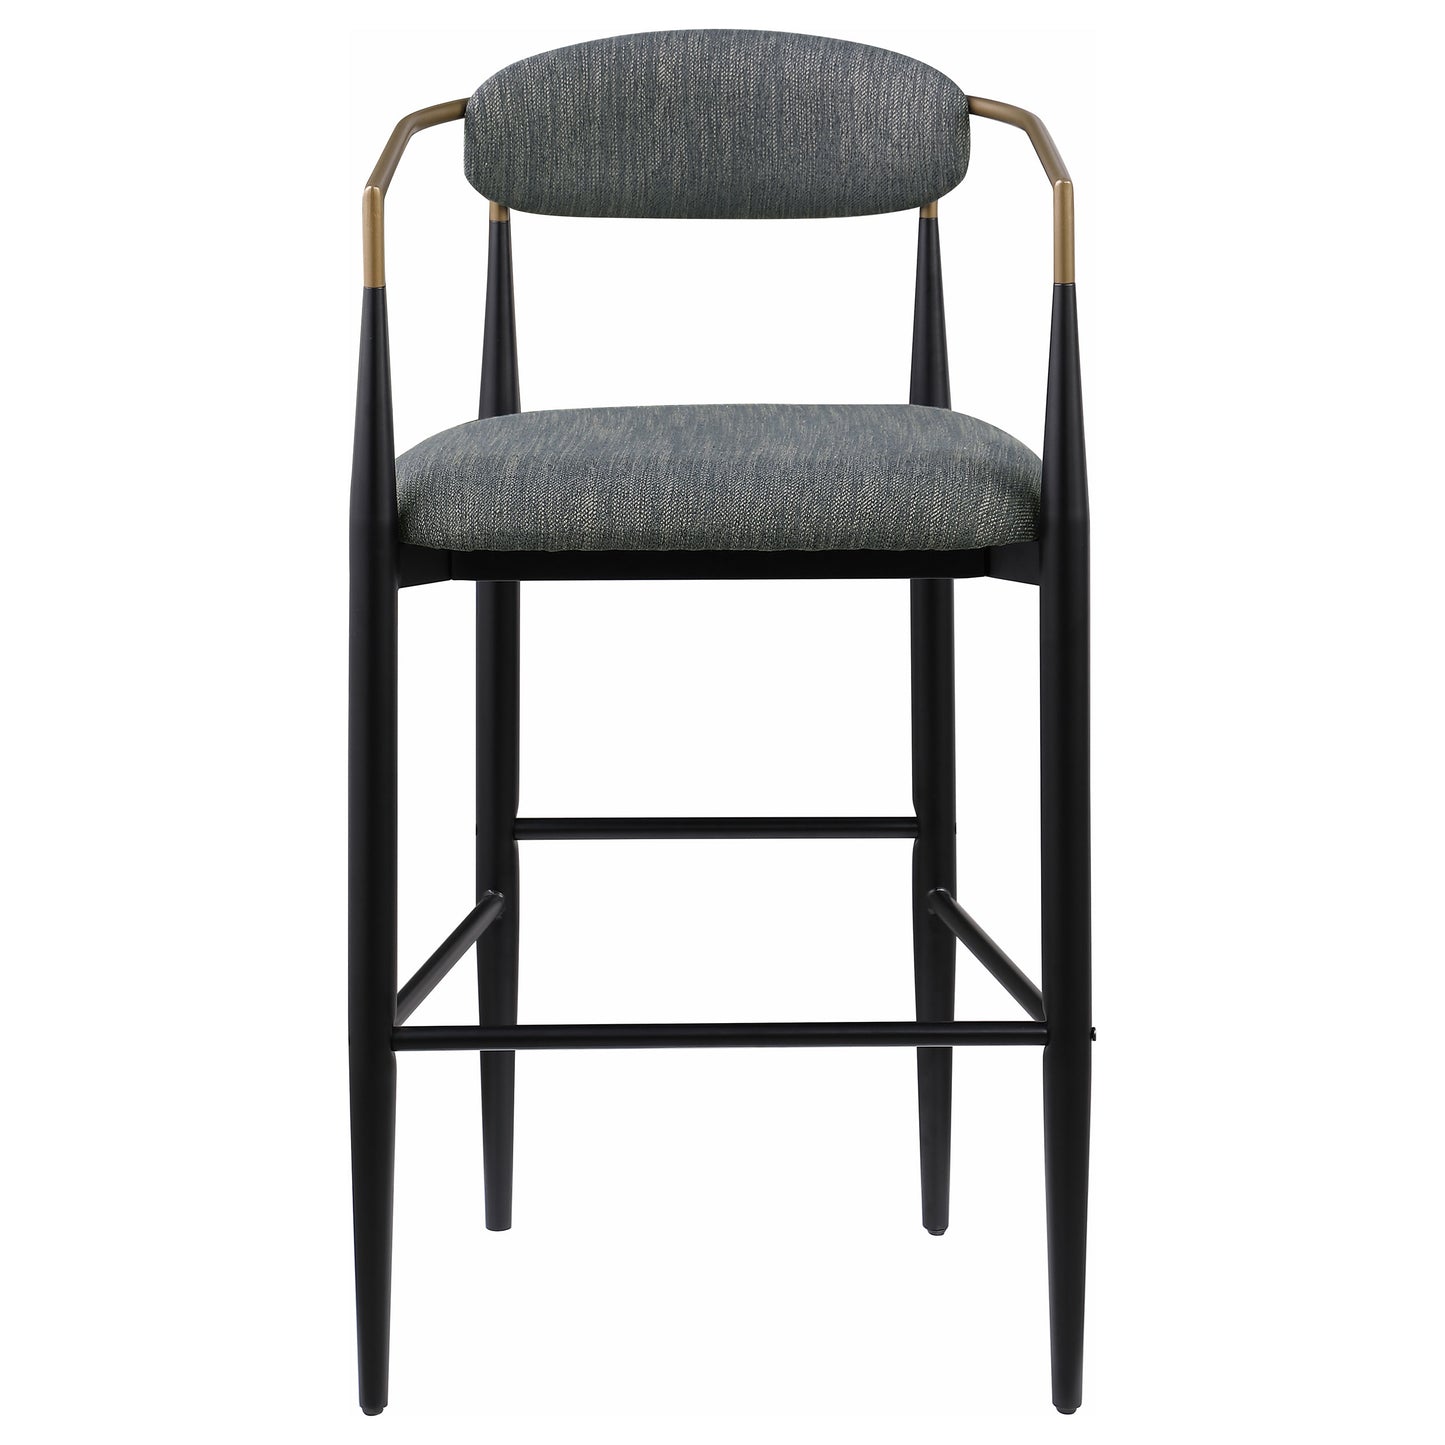 Tina Metal Pub Height Bar Stool with Upholstered Back and Seat Dark Grey (Set of 2)